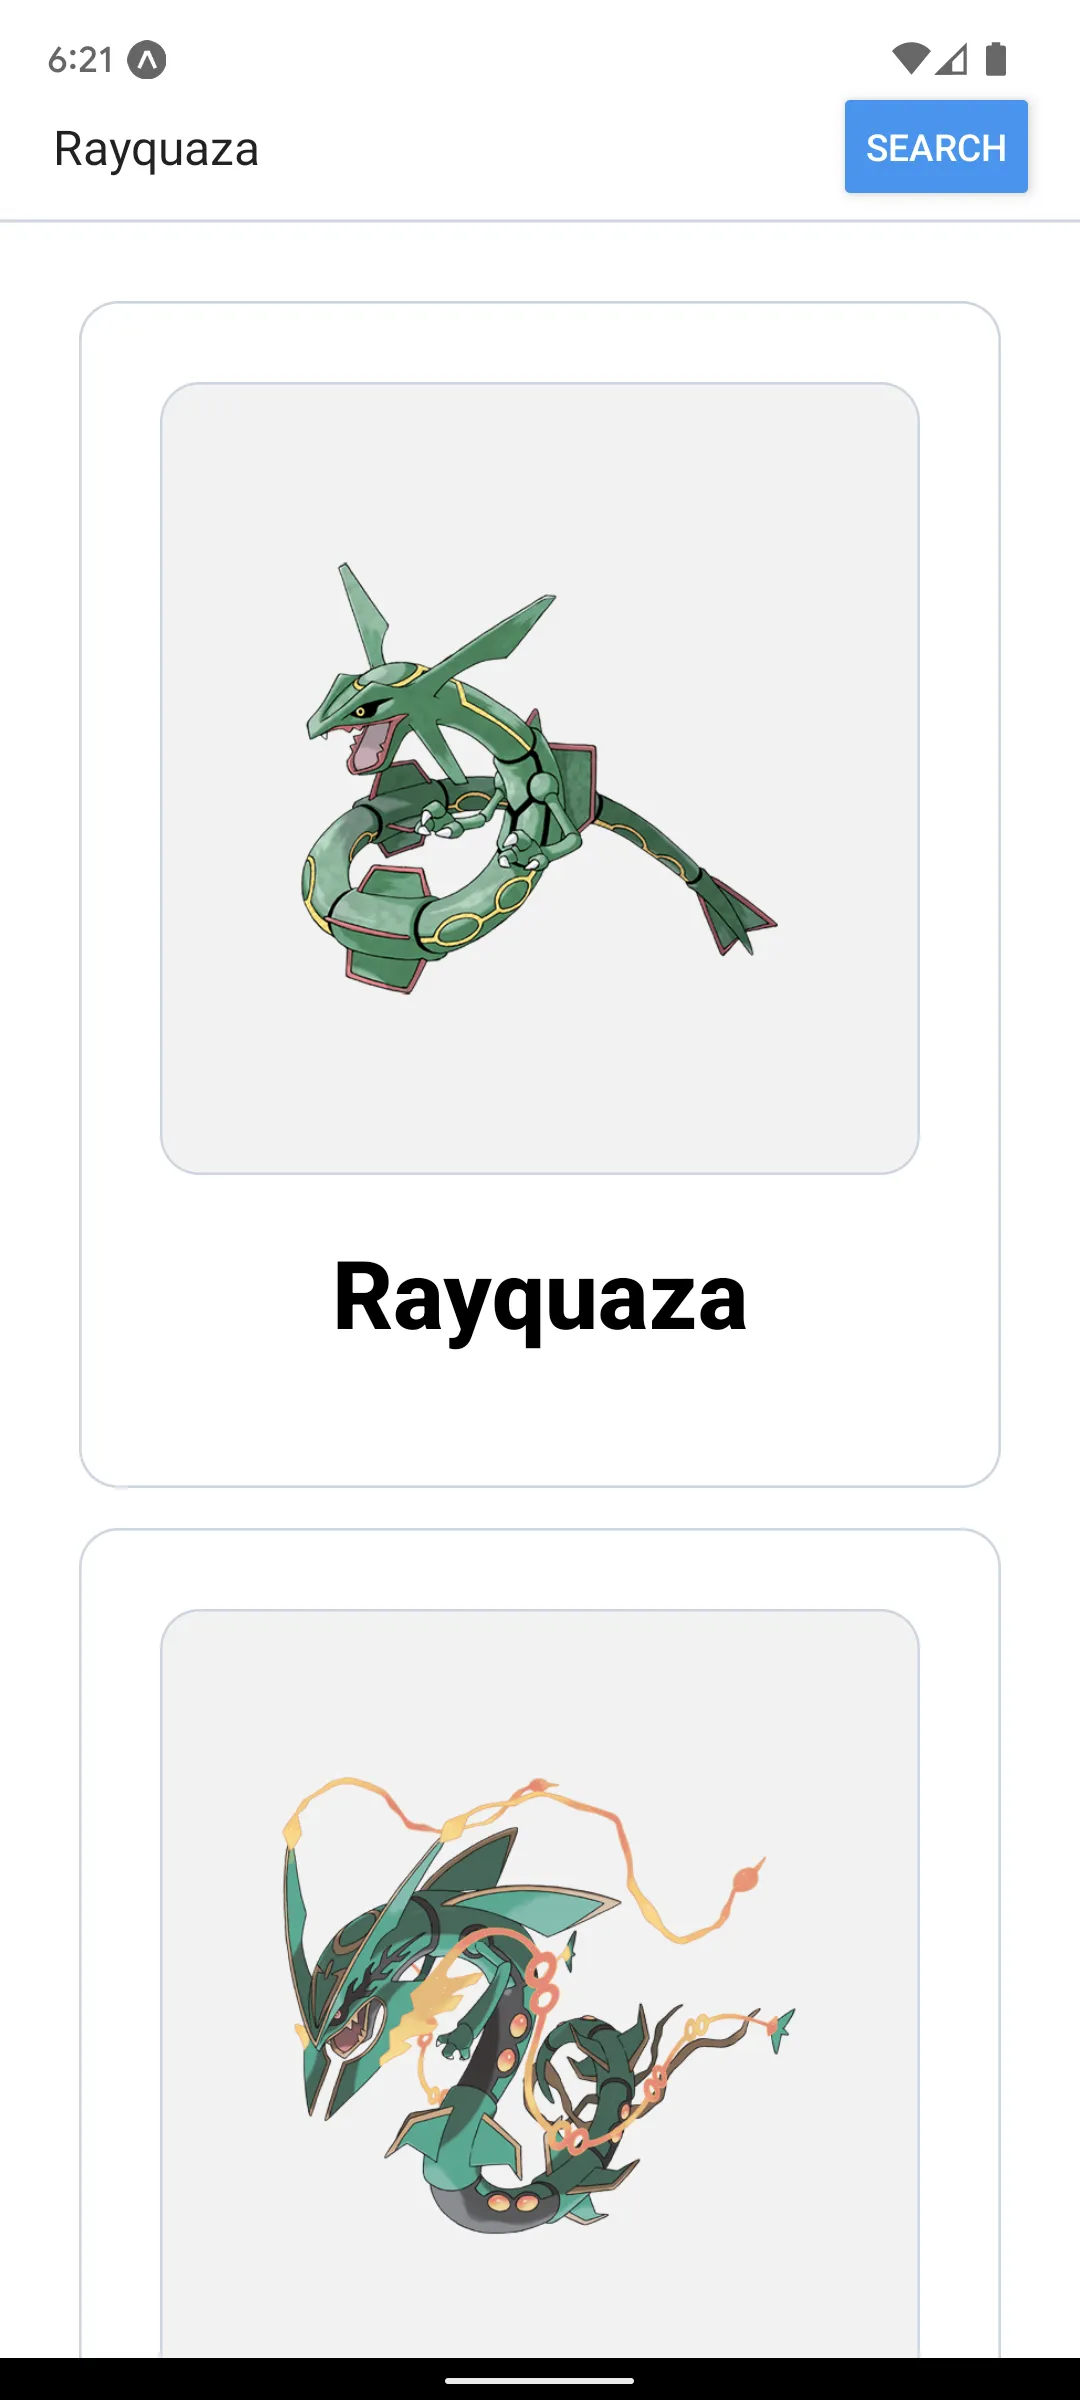 Searching up Rayquaza to demonstrate search
functionality